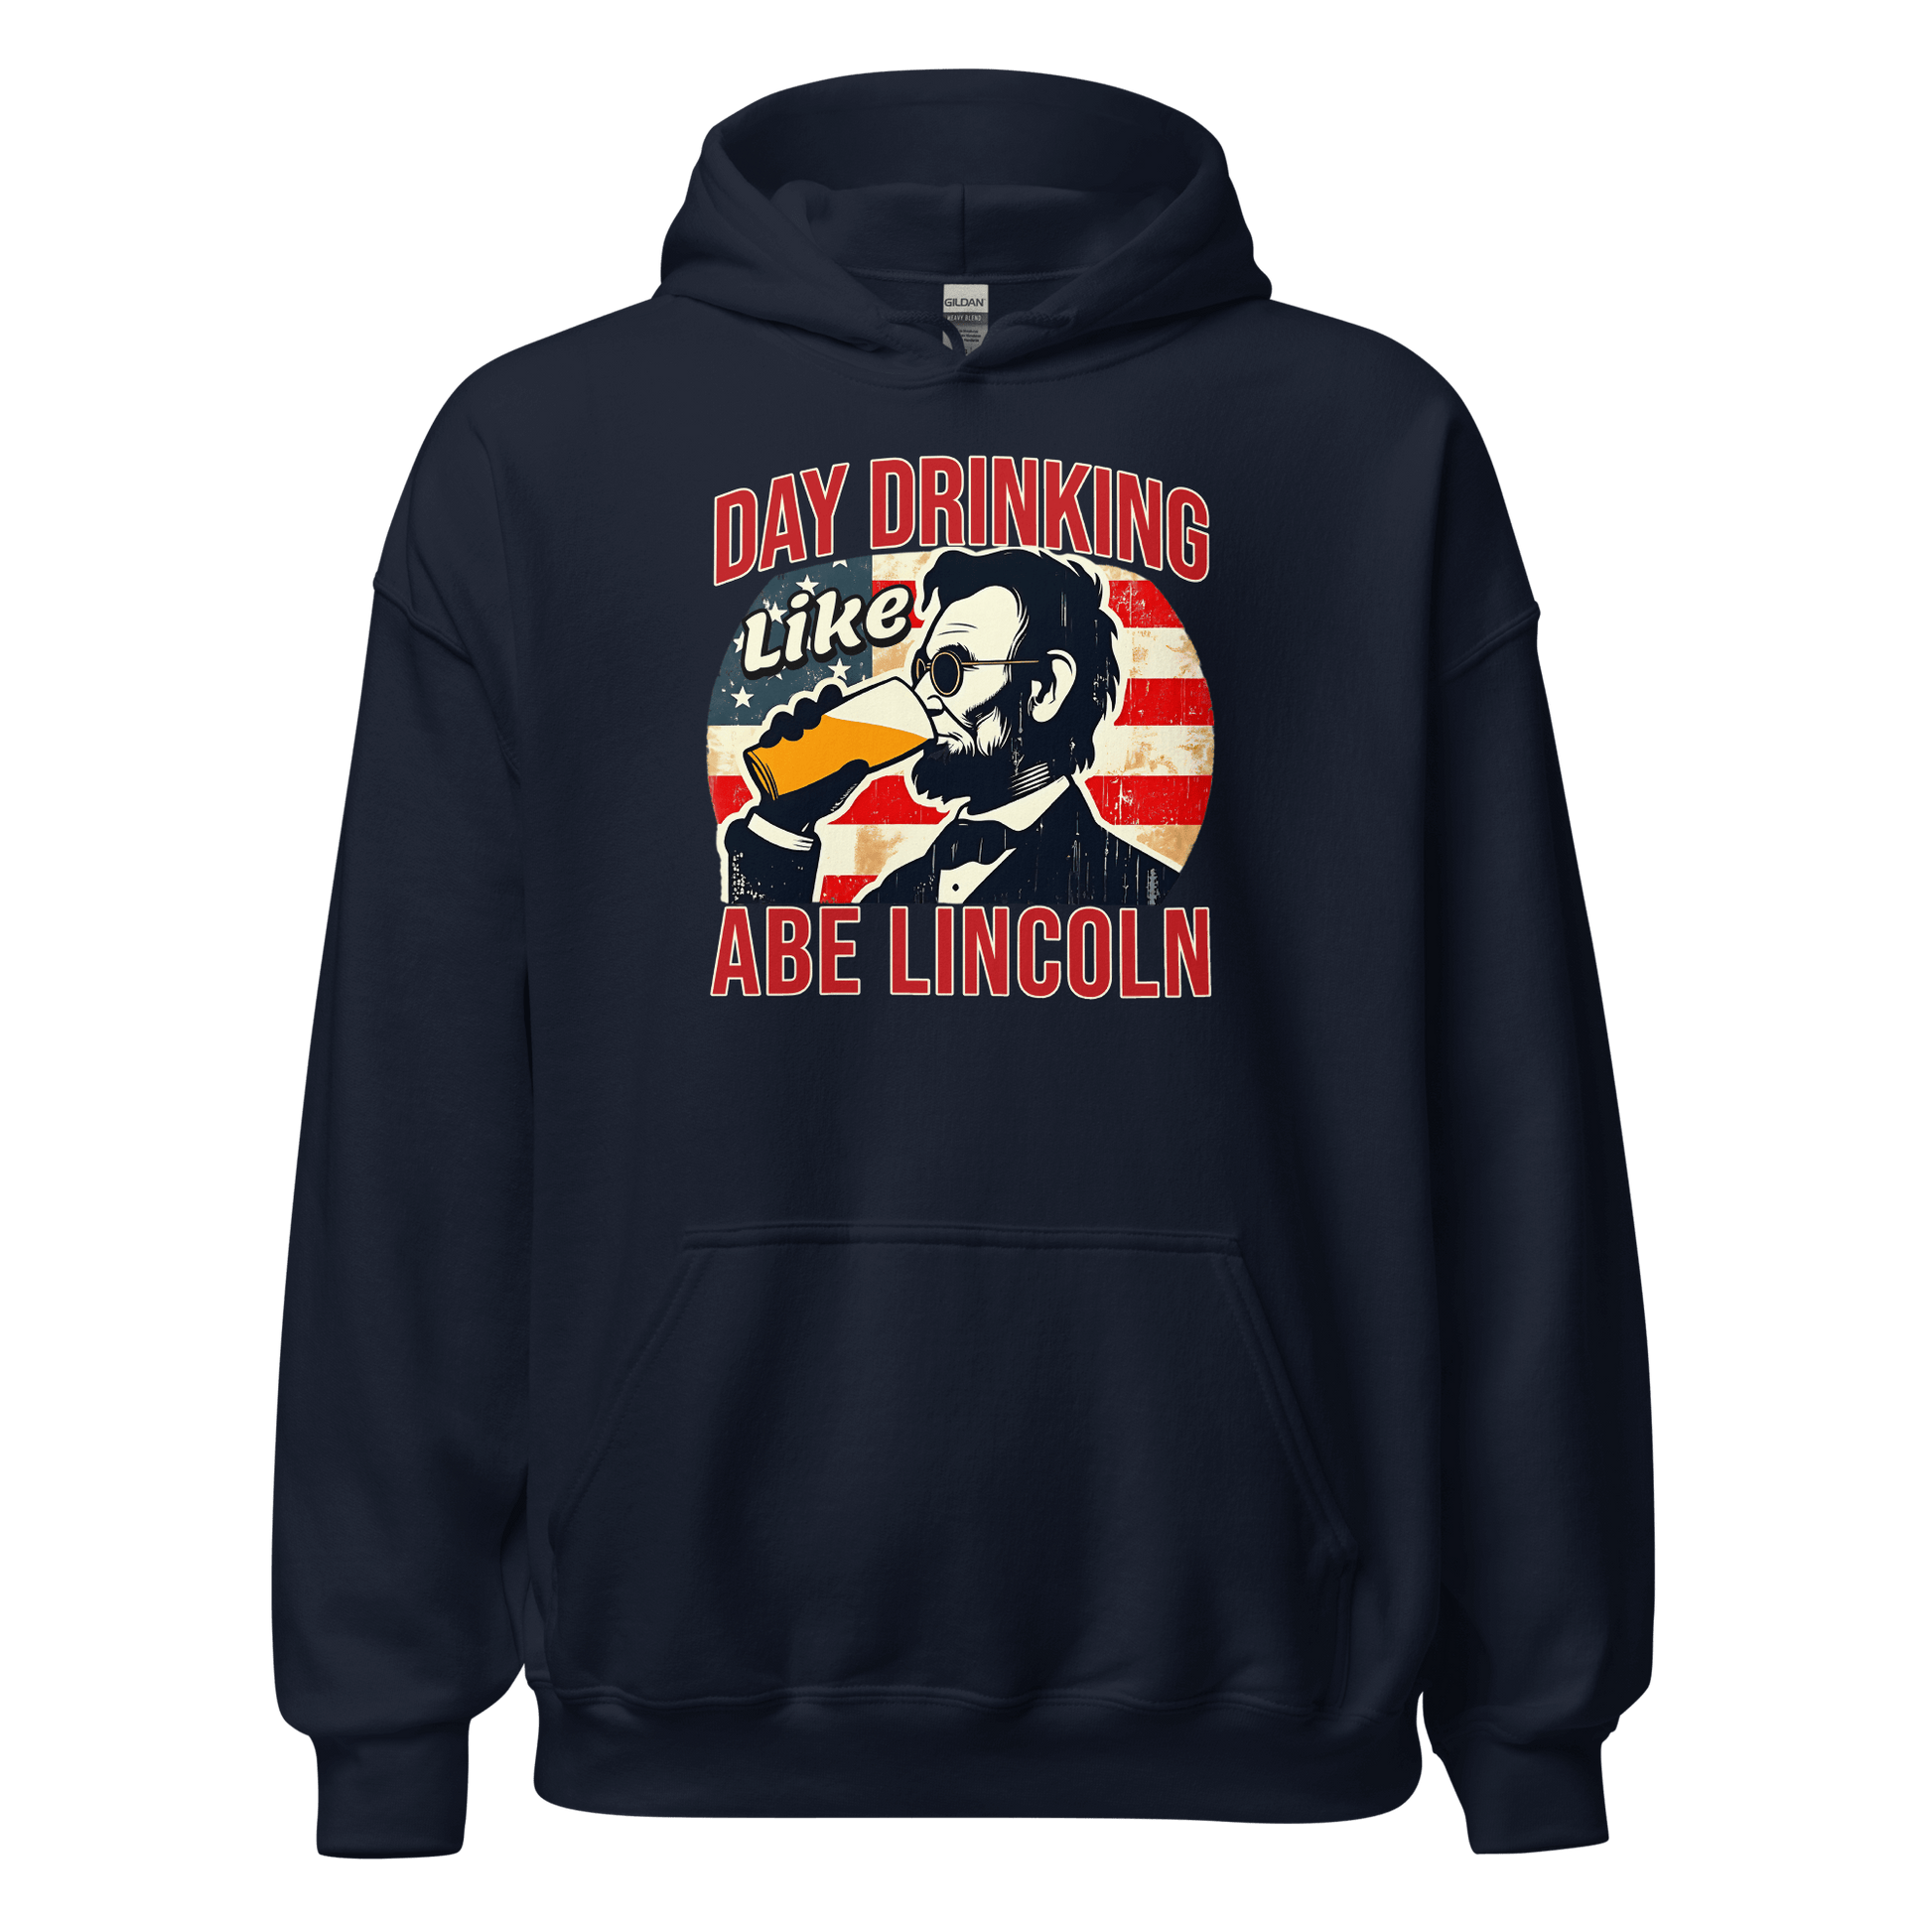 Hoodie with Day Drinking Like Abe Lincoln text, image of Abe Lincoln drinking a glass of beer, and distressed American flag background. Perfect for 4th of July